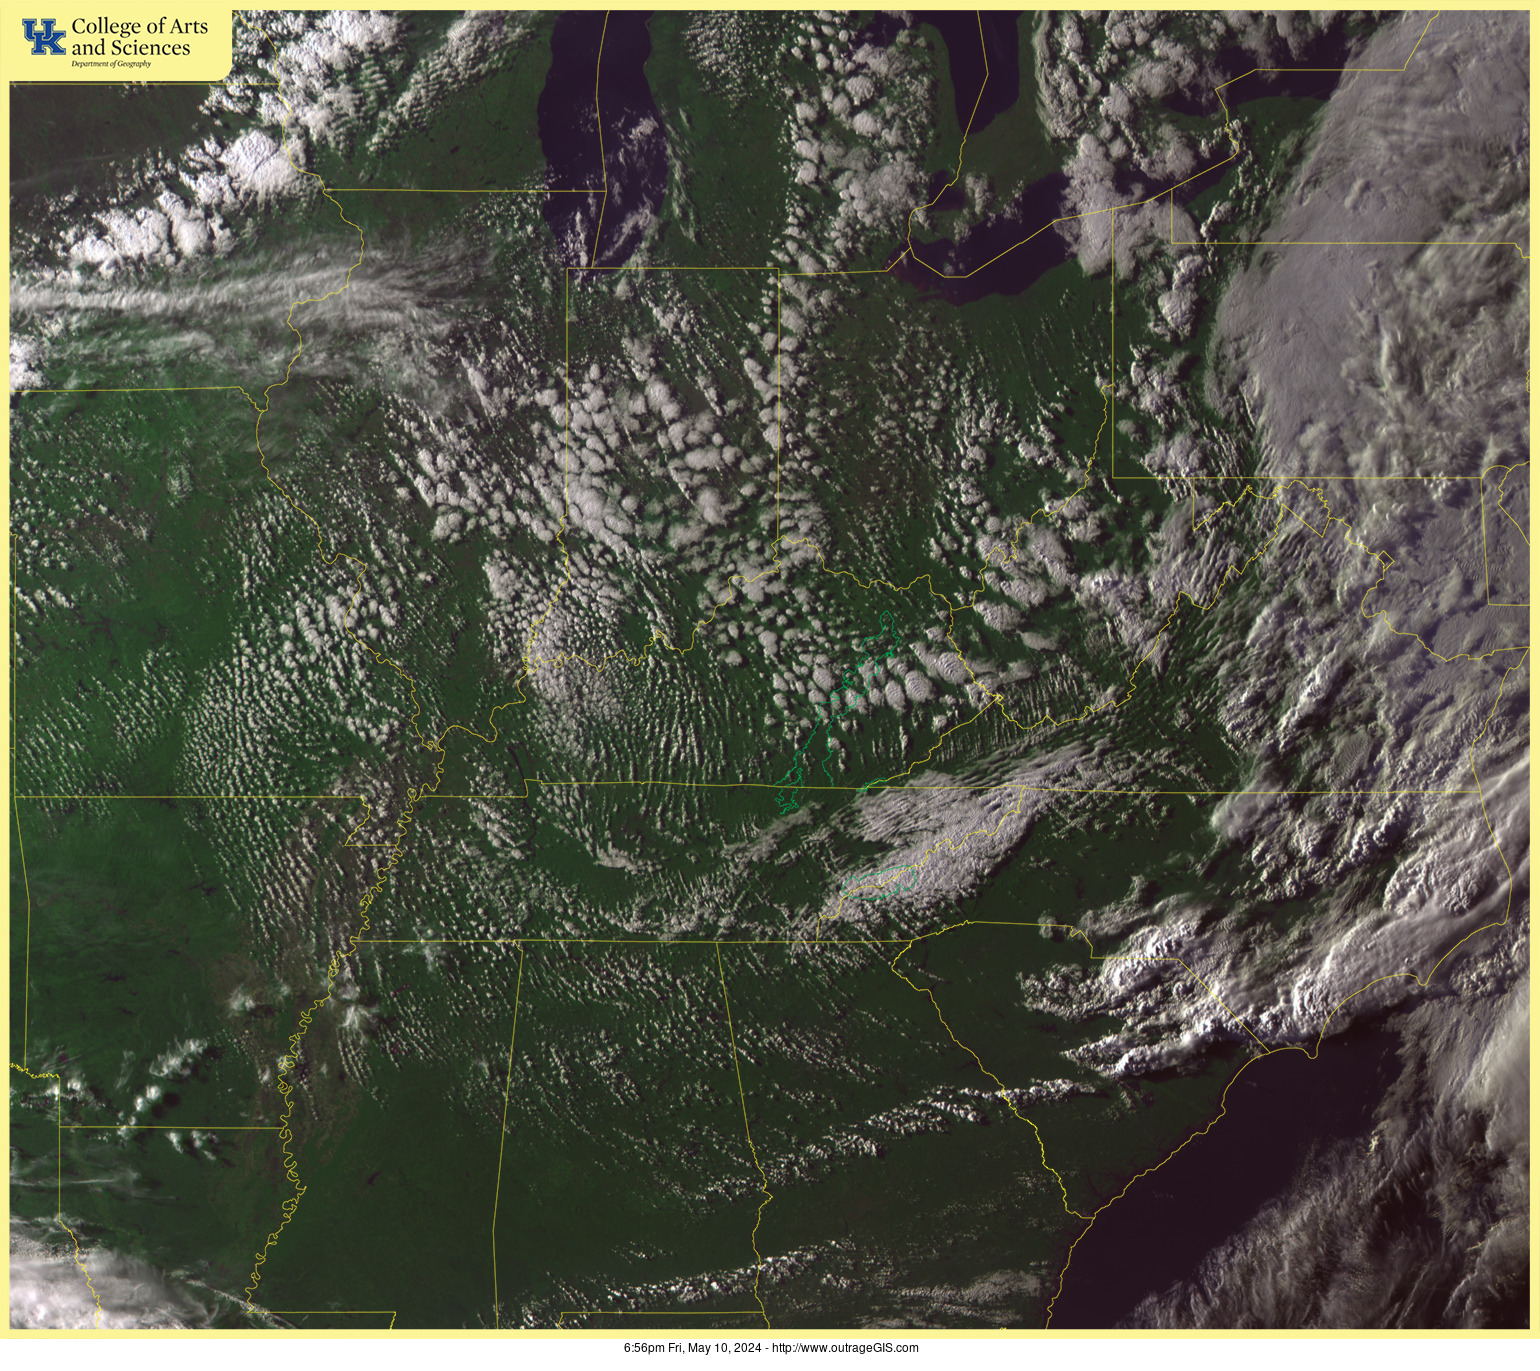 Current visible satellite for the Daniel Boone National Forest.